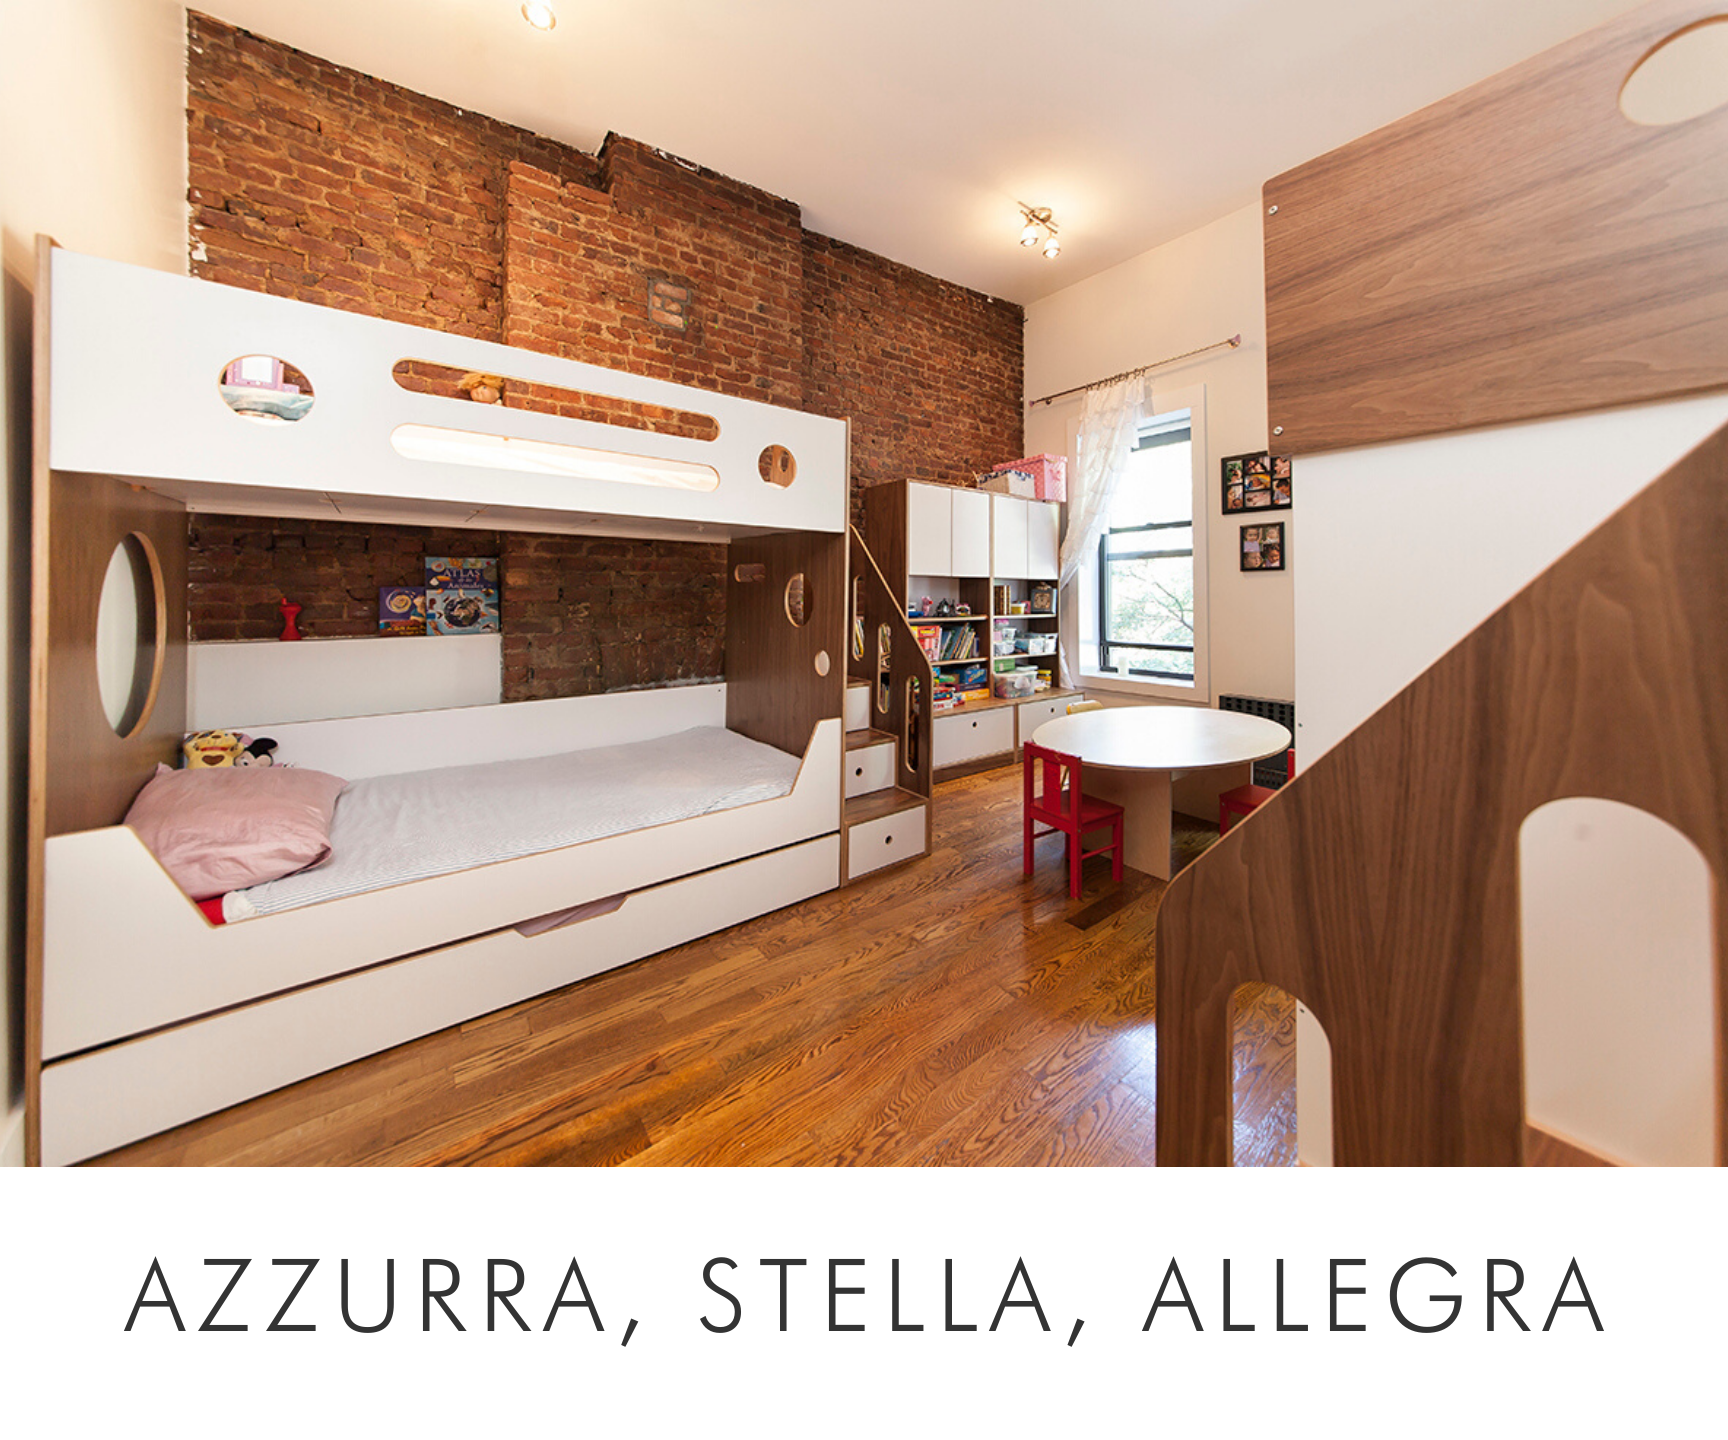 Warm children's room with bunk beds, exposed brick wall, hardwood floors, and a round table.